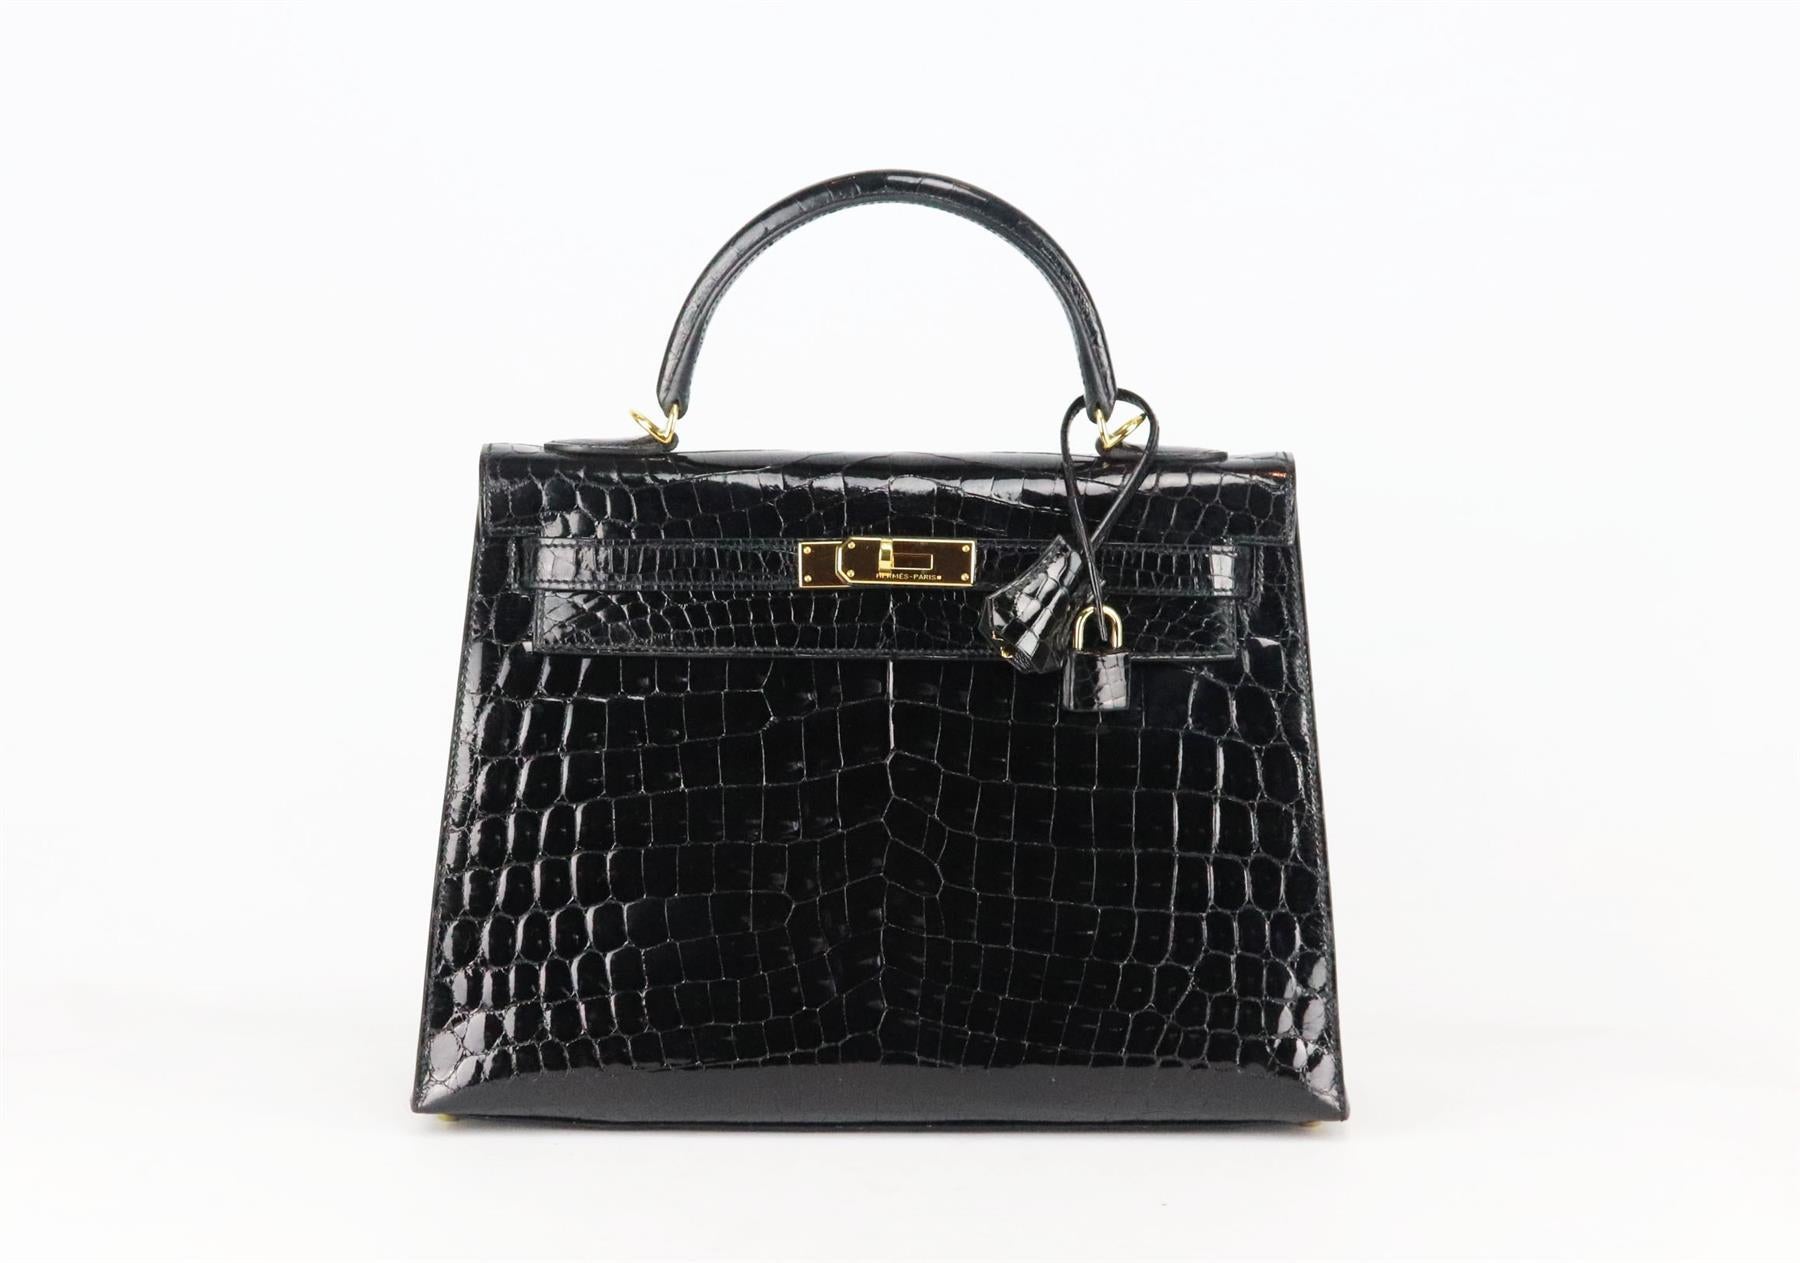 <ul>
<li>Made in France, this beautiful 2014 Hermès ‘Kelly Sellier’ 32cm handbag has been made from shiny Porosus Crocodile exterior in black and matching leather interior, this piece is decorated with gold hardware on the front and finished with